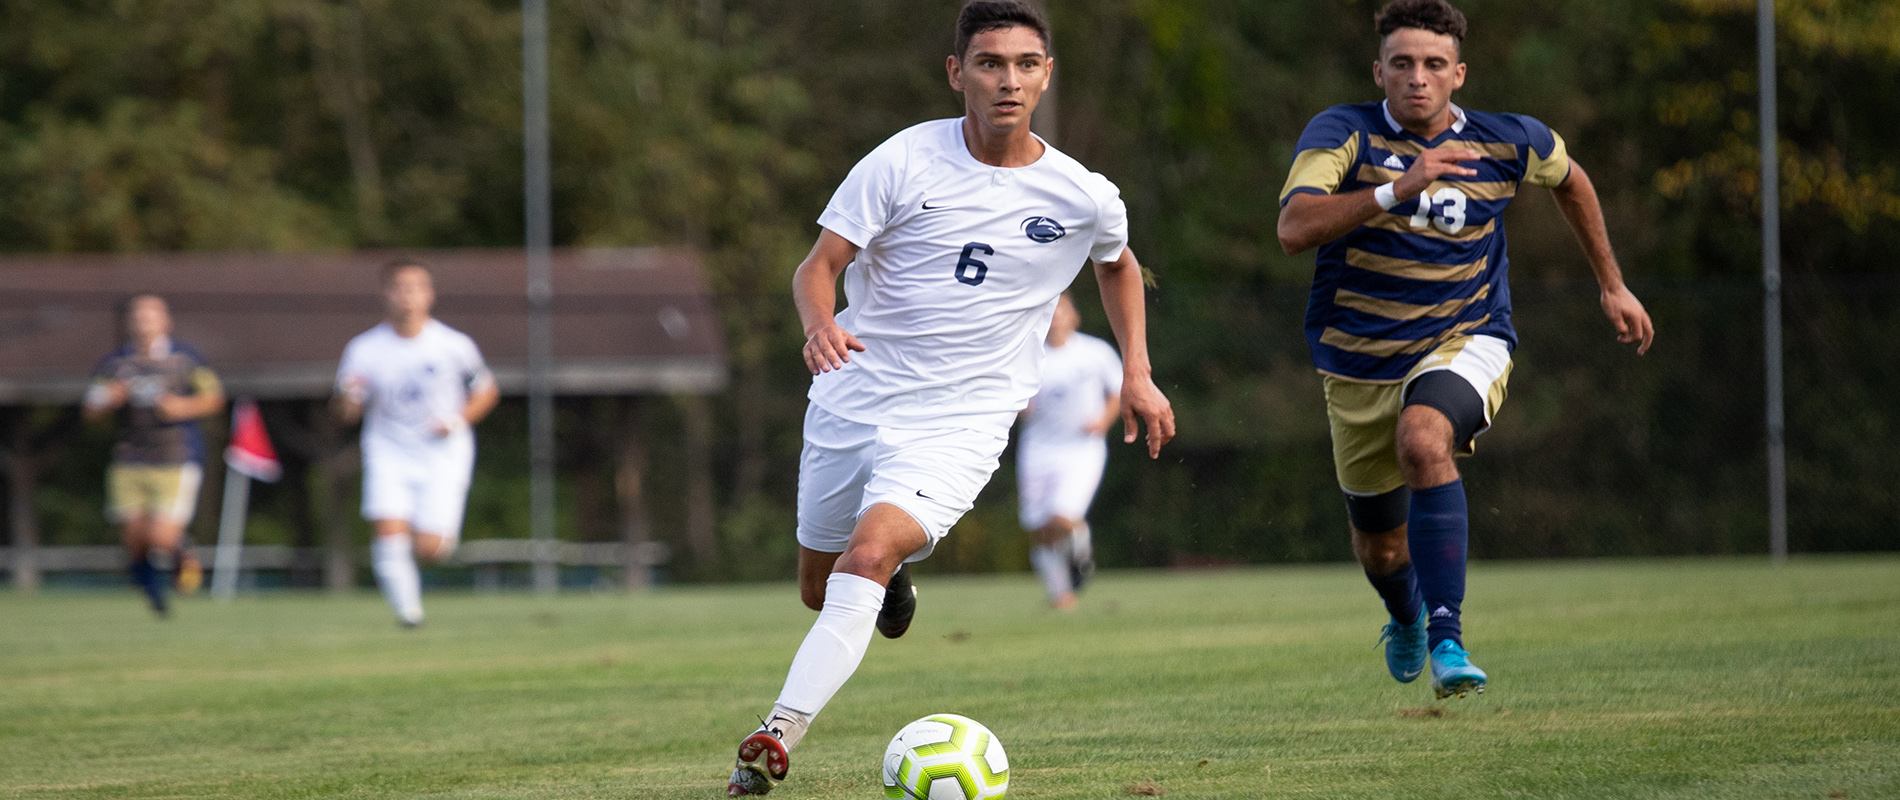 Penn State New Kensington's Carlos Colindres.